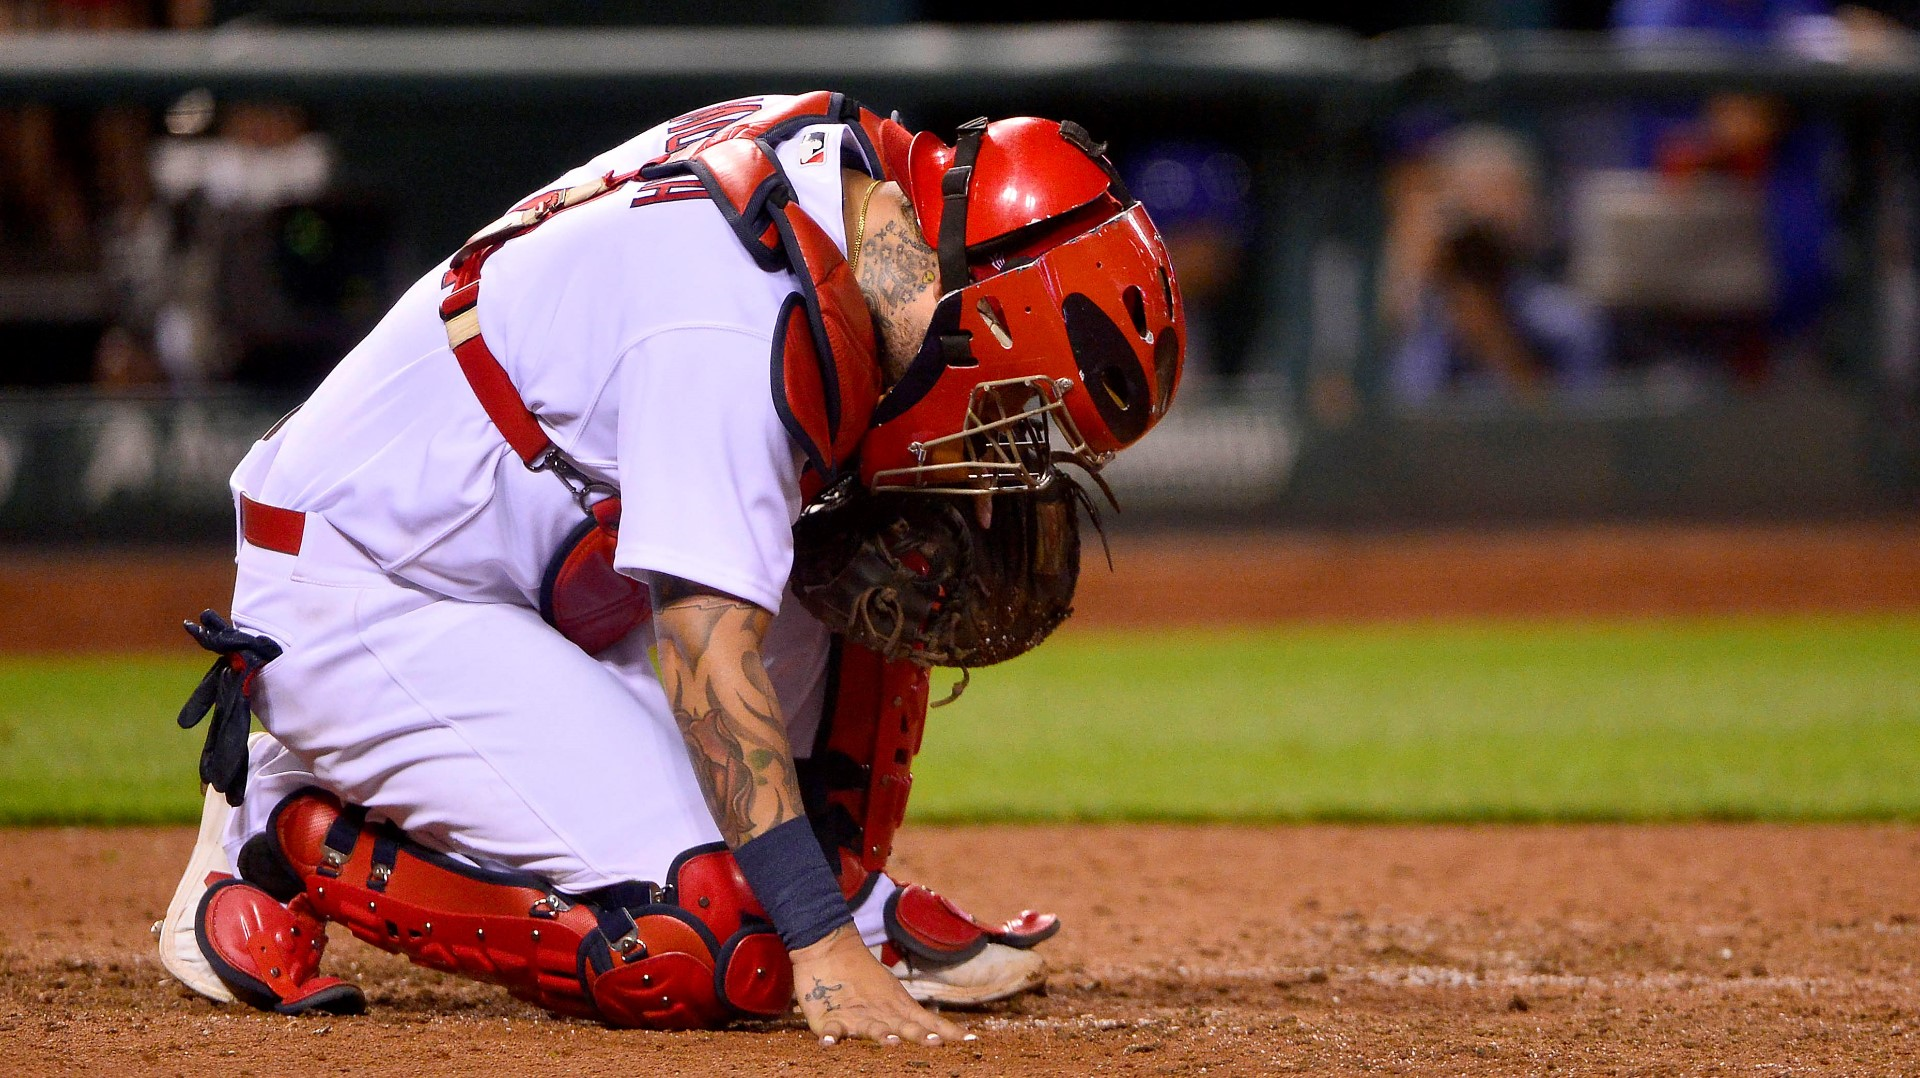 Download Yadier Molina reacts to a home run hit by his St. Louis